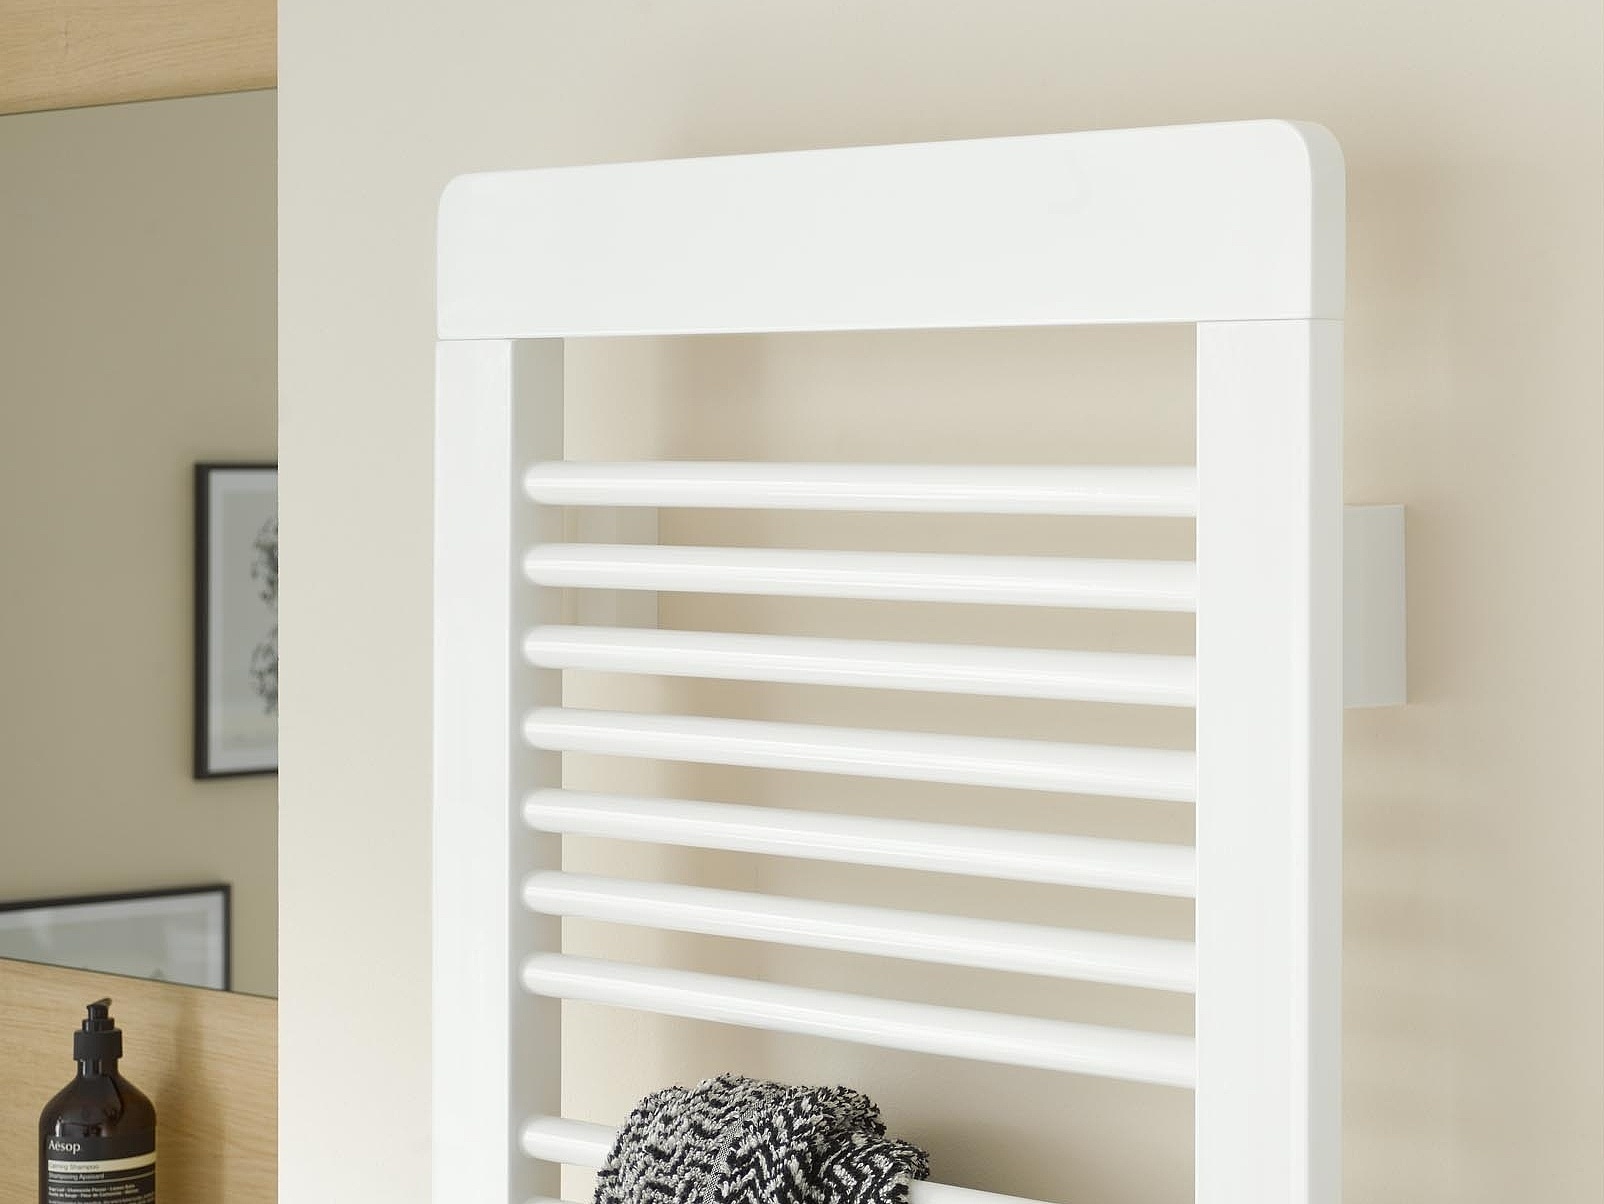 The wide spacing of the Kermi Credo plus Design and bathroom radiator is ideal for heating towels or clothing.